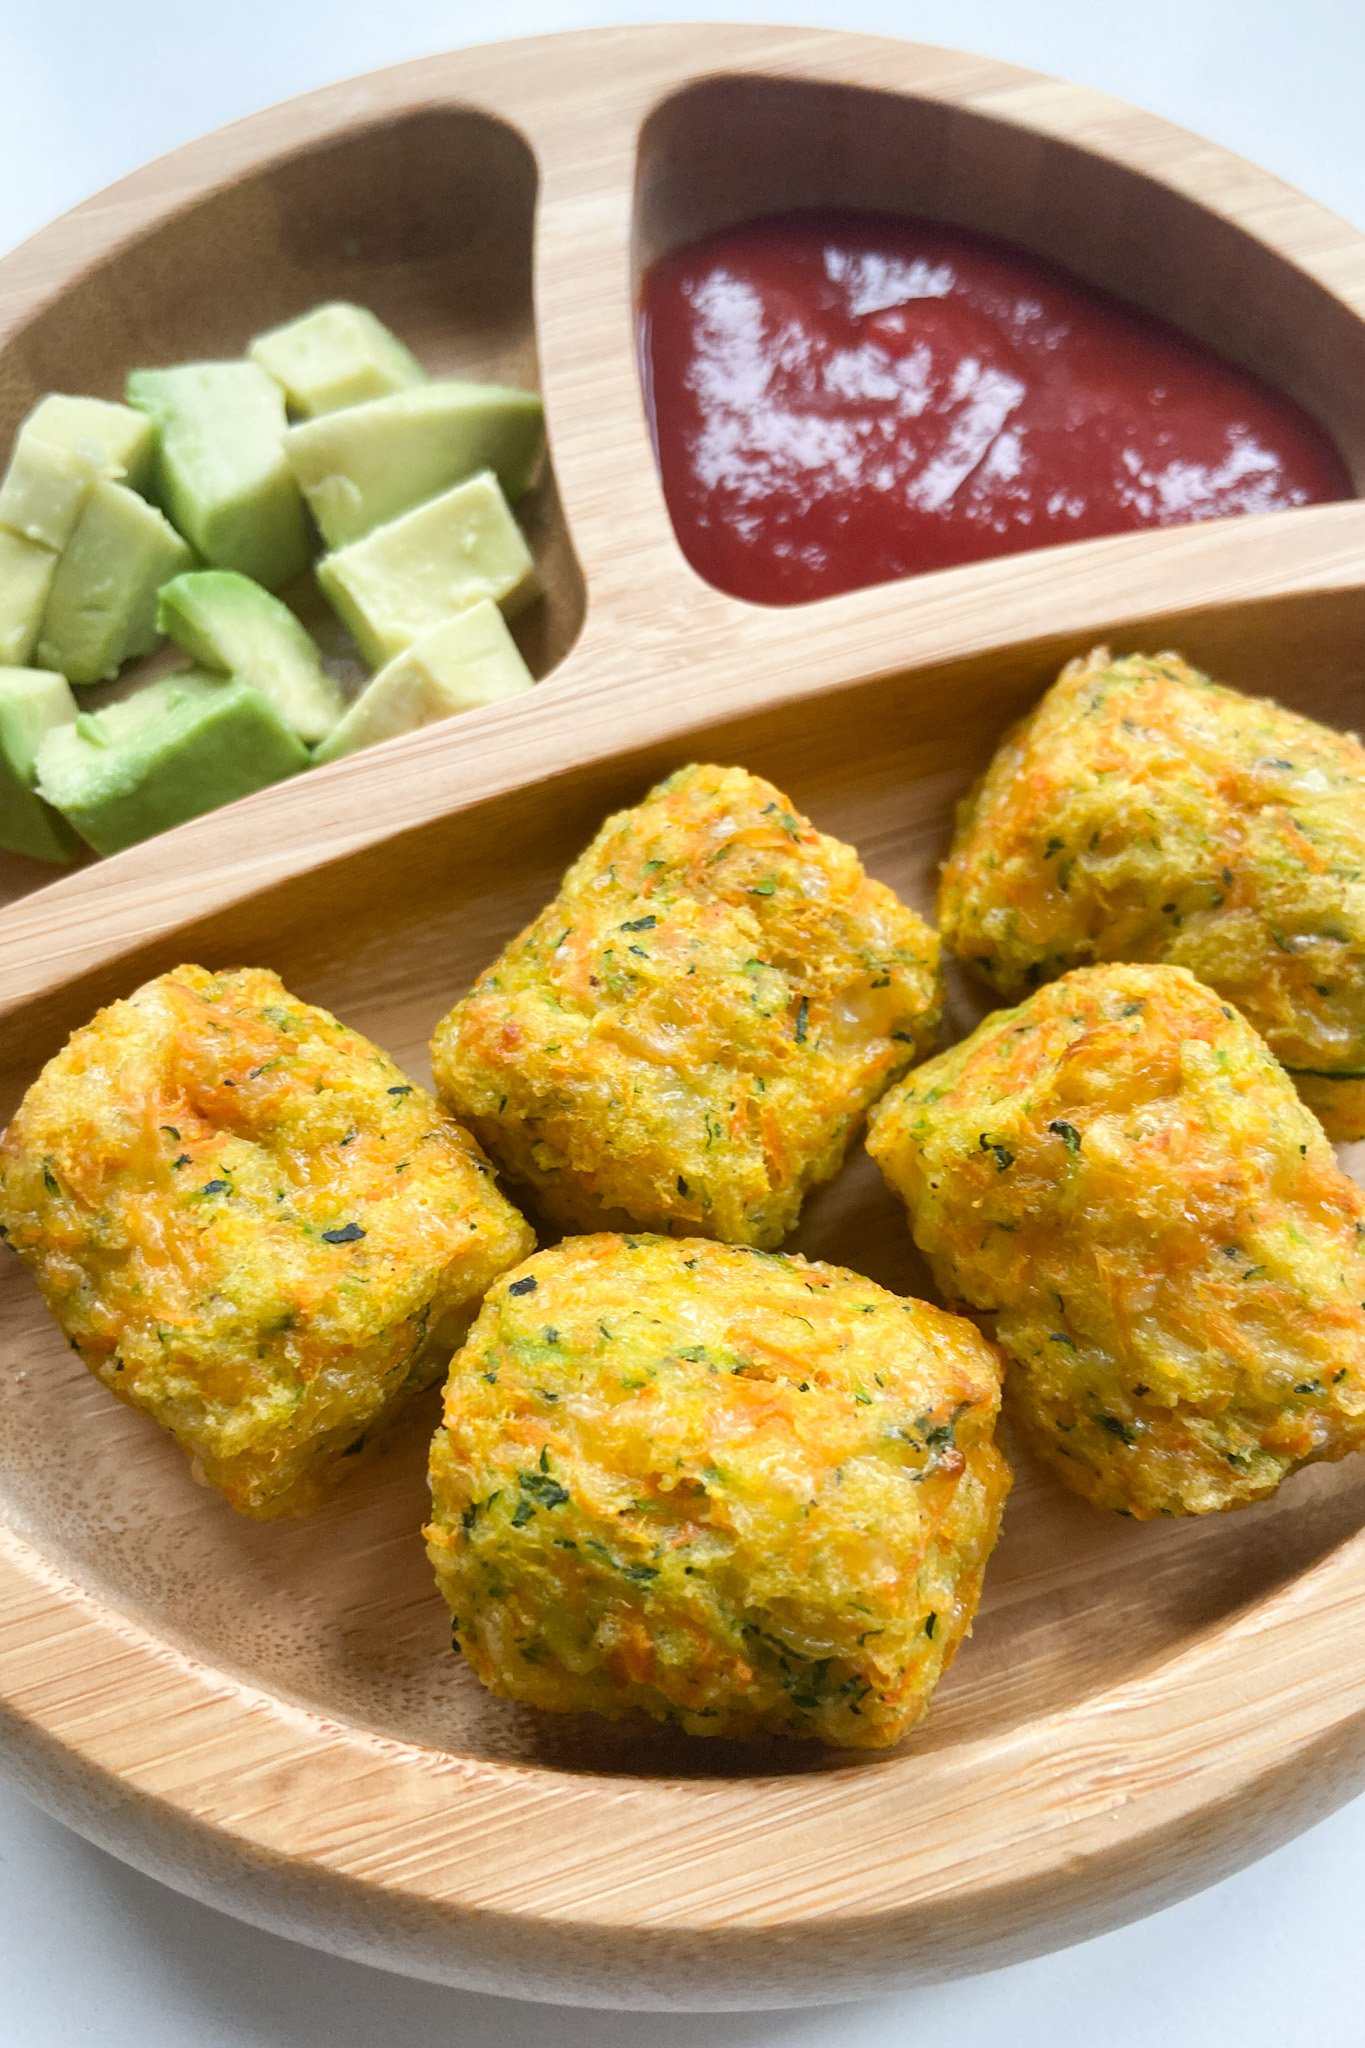 Zucchini carrot tots served with avocados and ketchup